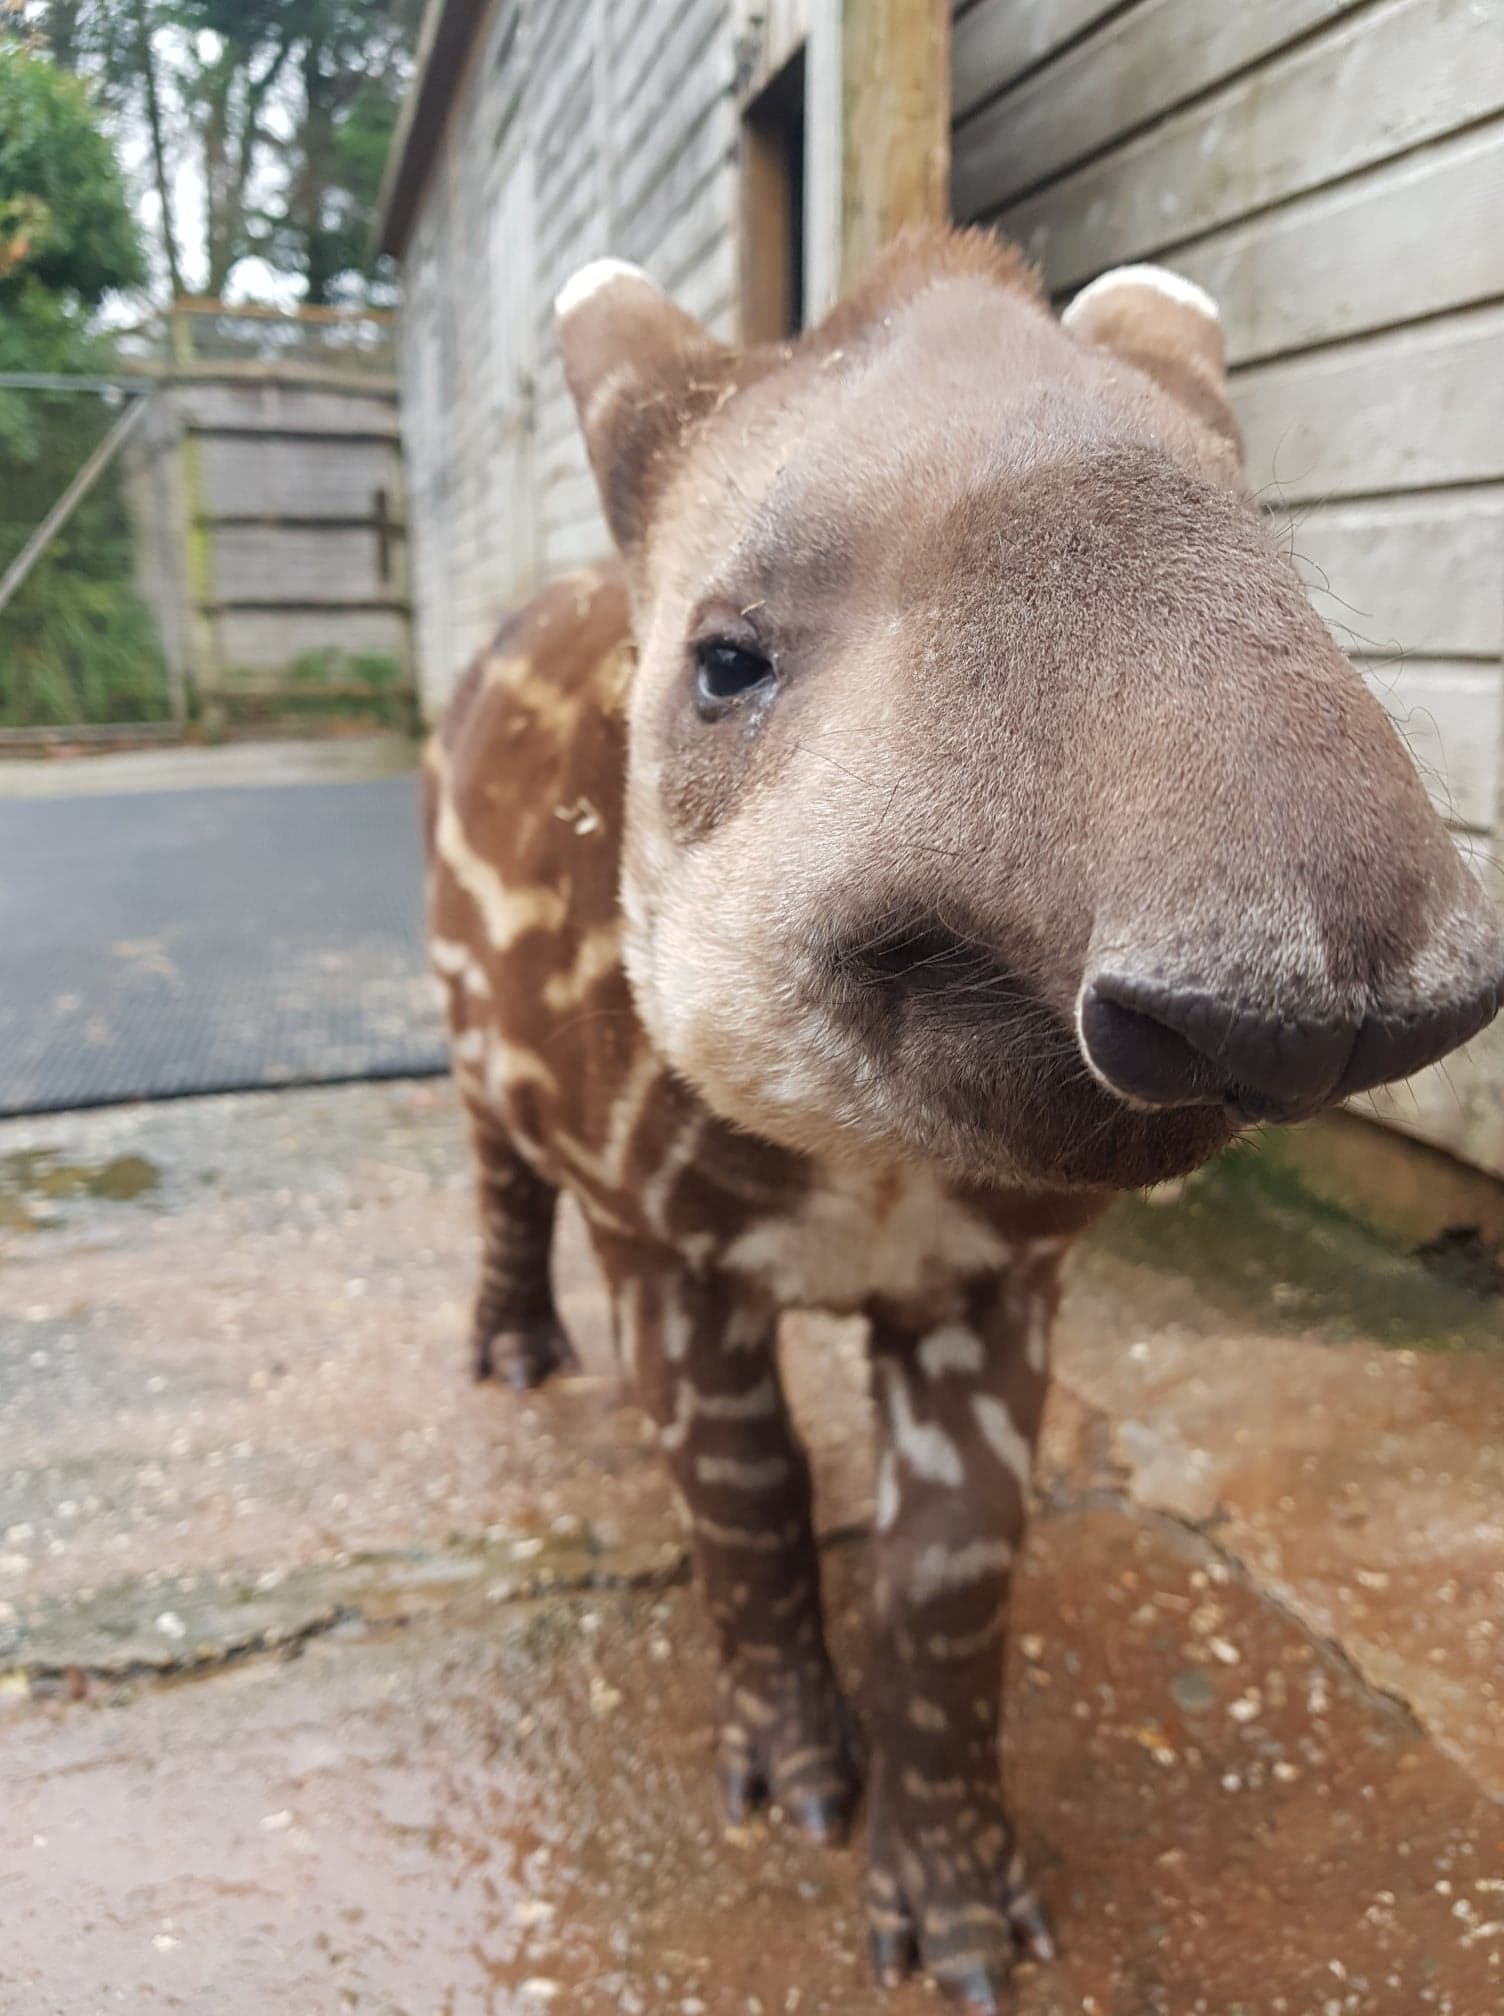 Newquay Zoo's baby tapir Shaun celebrates Giving Tuesday by painting -  Newquay Zoo